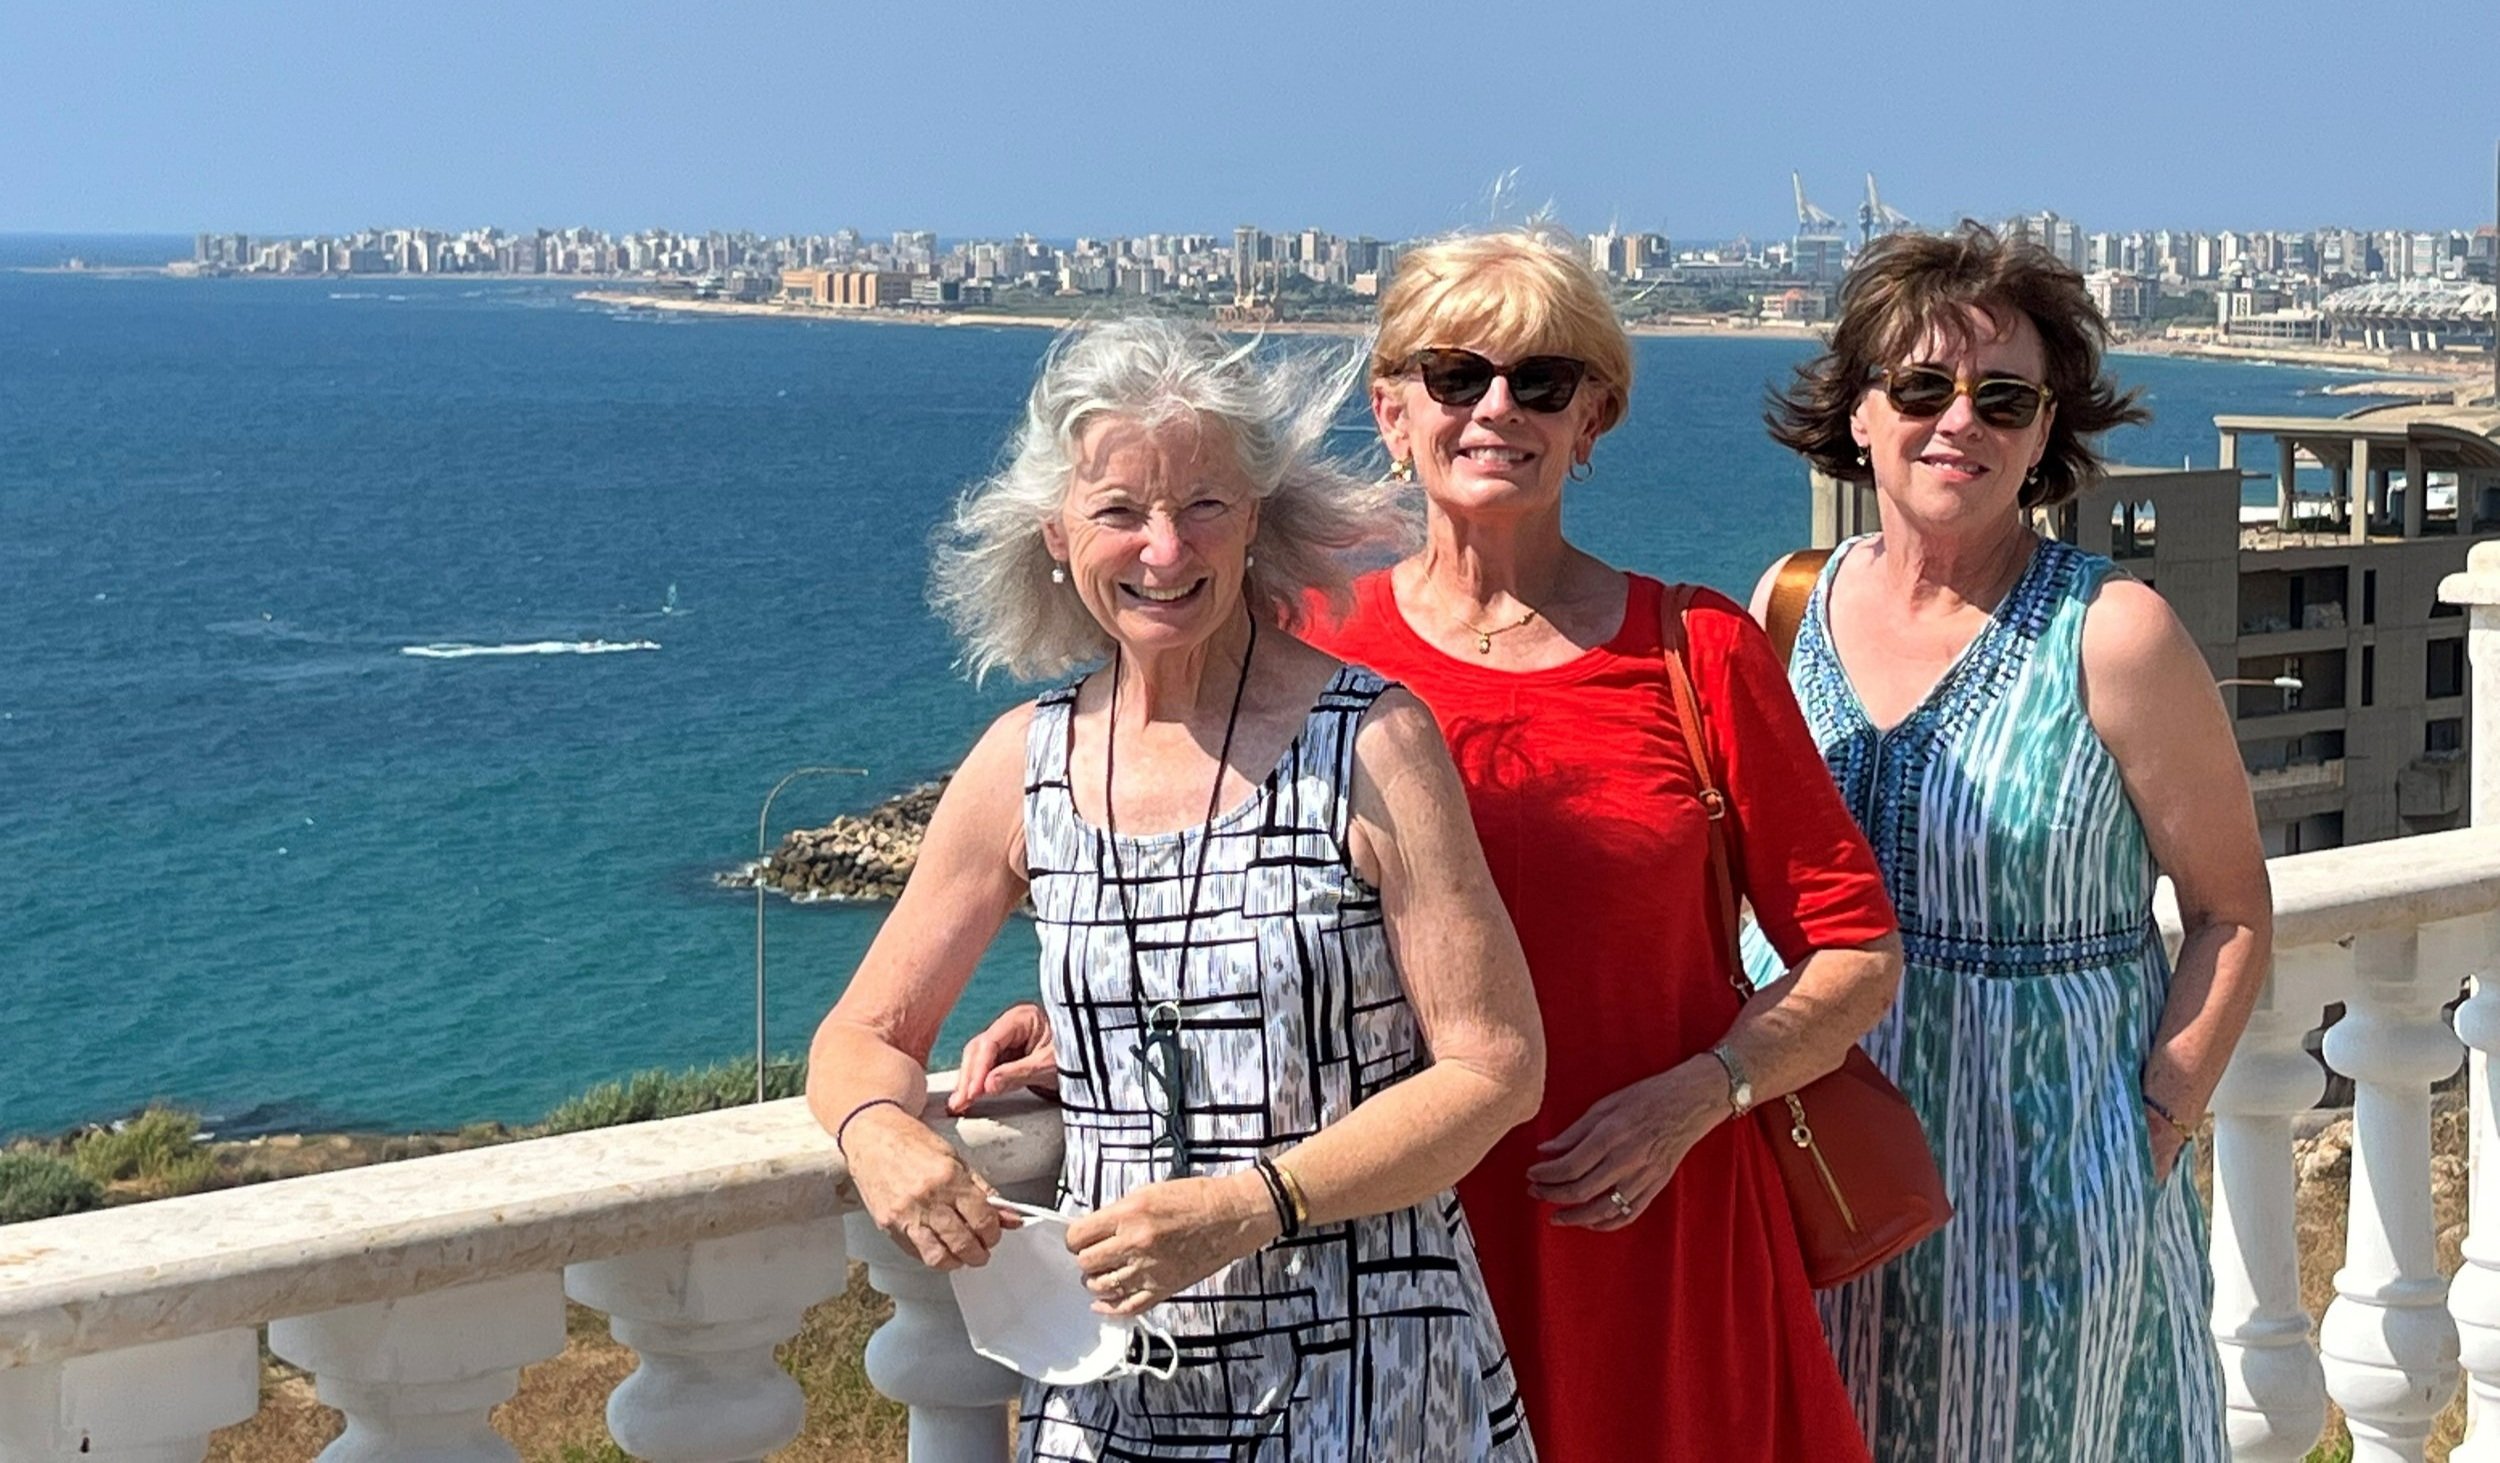   Mona Lee, Christi Ensch, and Susan Henry overlooking the Mediterranean.  